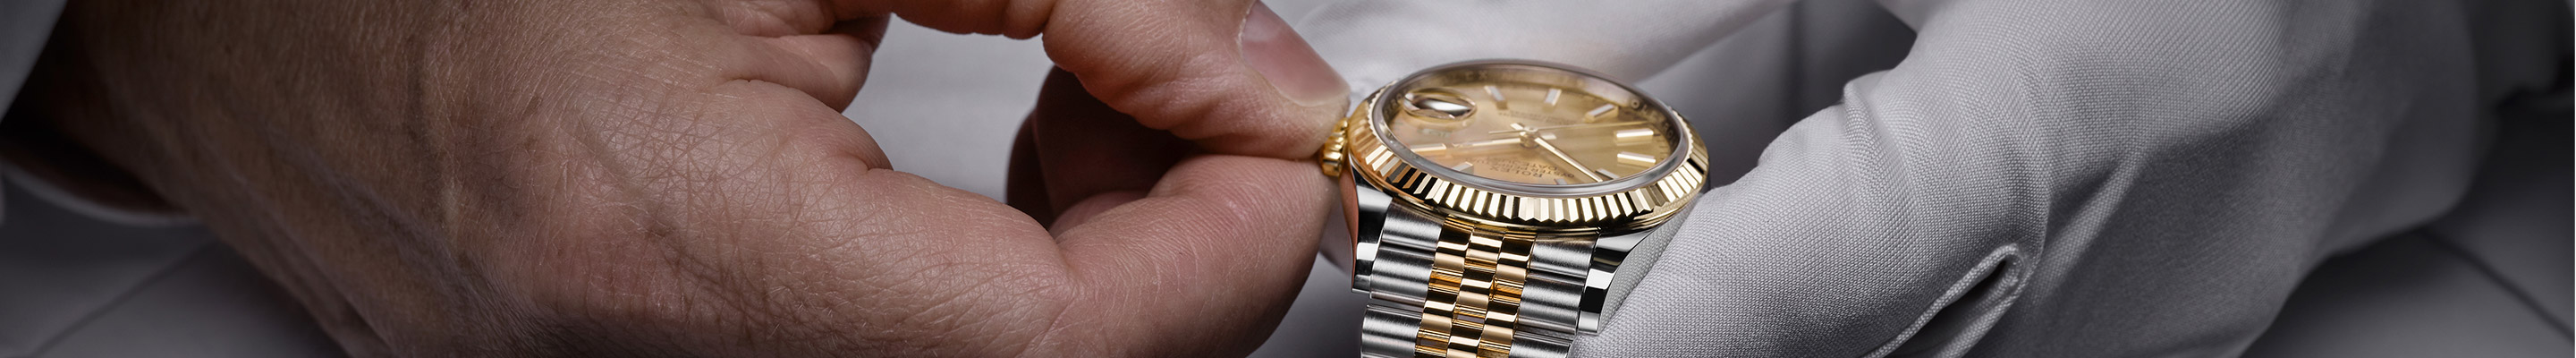 ROLEX WATCH SERVICING AND REPAIR AT N. Fox Jewelers